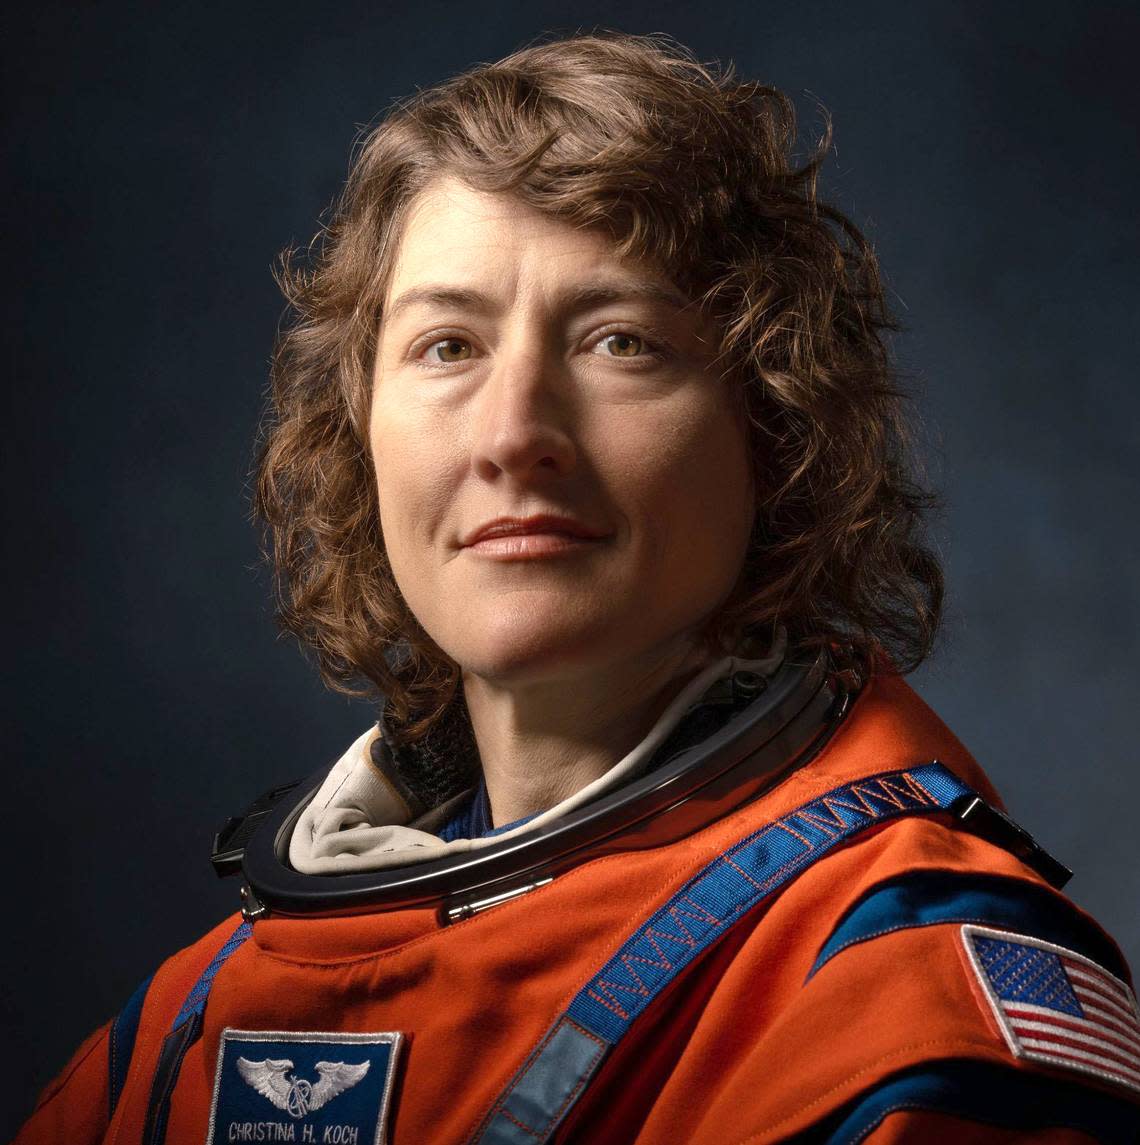 Christina Koch will be a mission specialist on the Artemis II mission to the moon in 2024. She took part in the first all-woman spacewalk in 2019. She grew up in Jacksonville, NC, and graduated from N.C. State University.